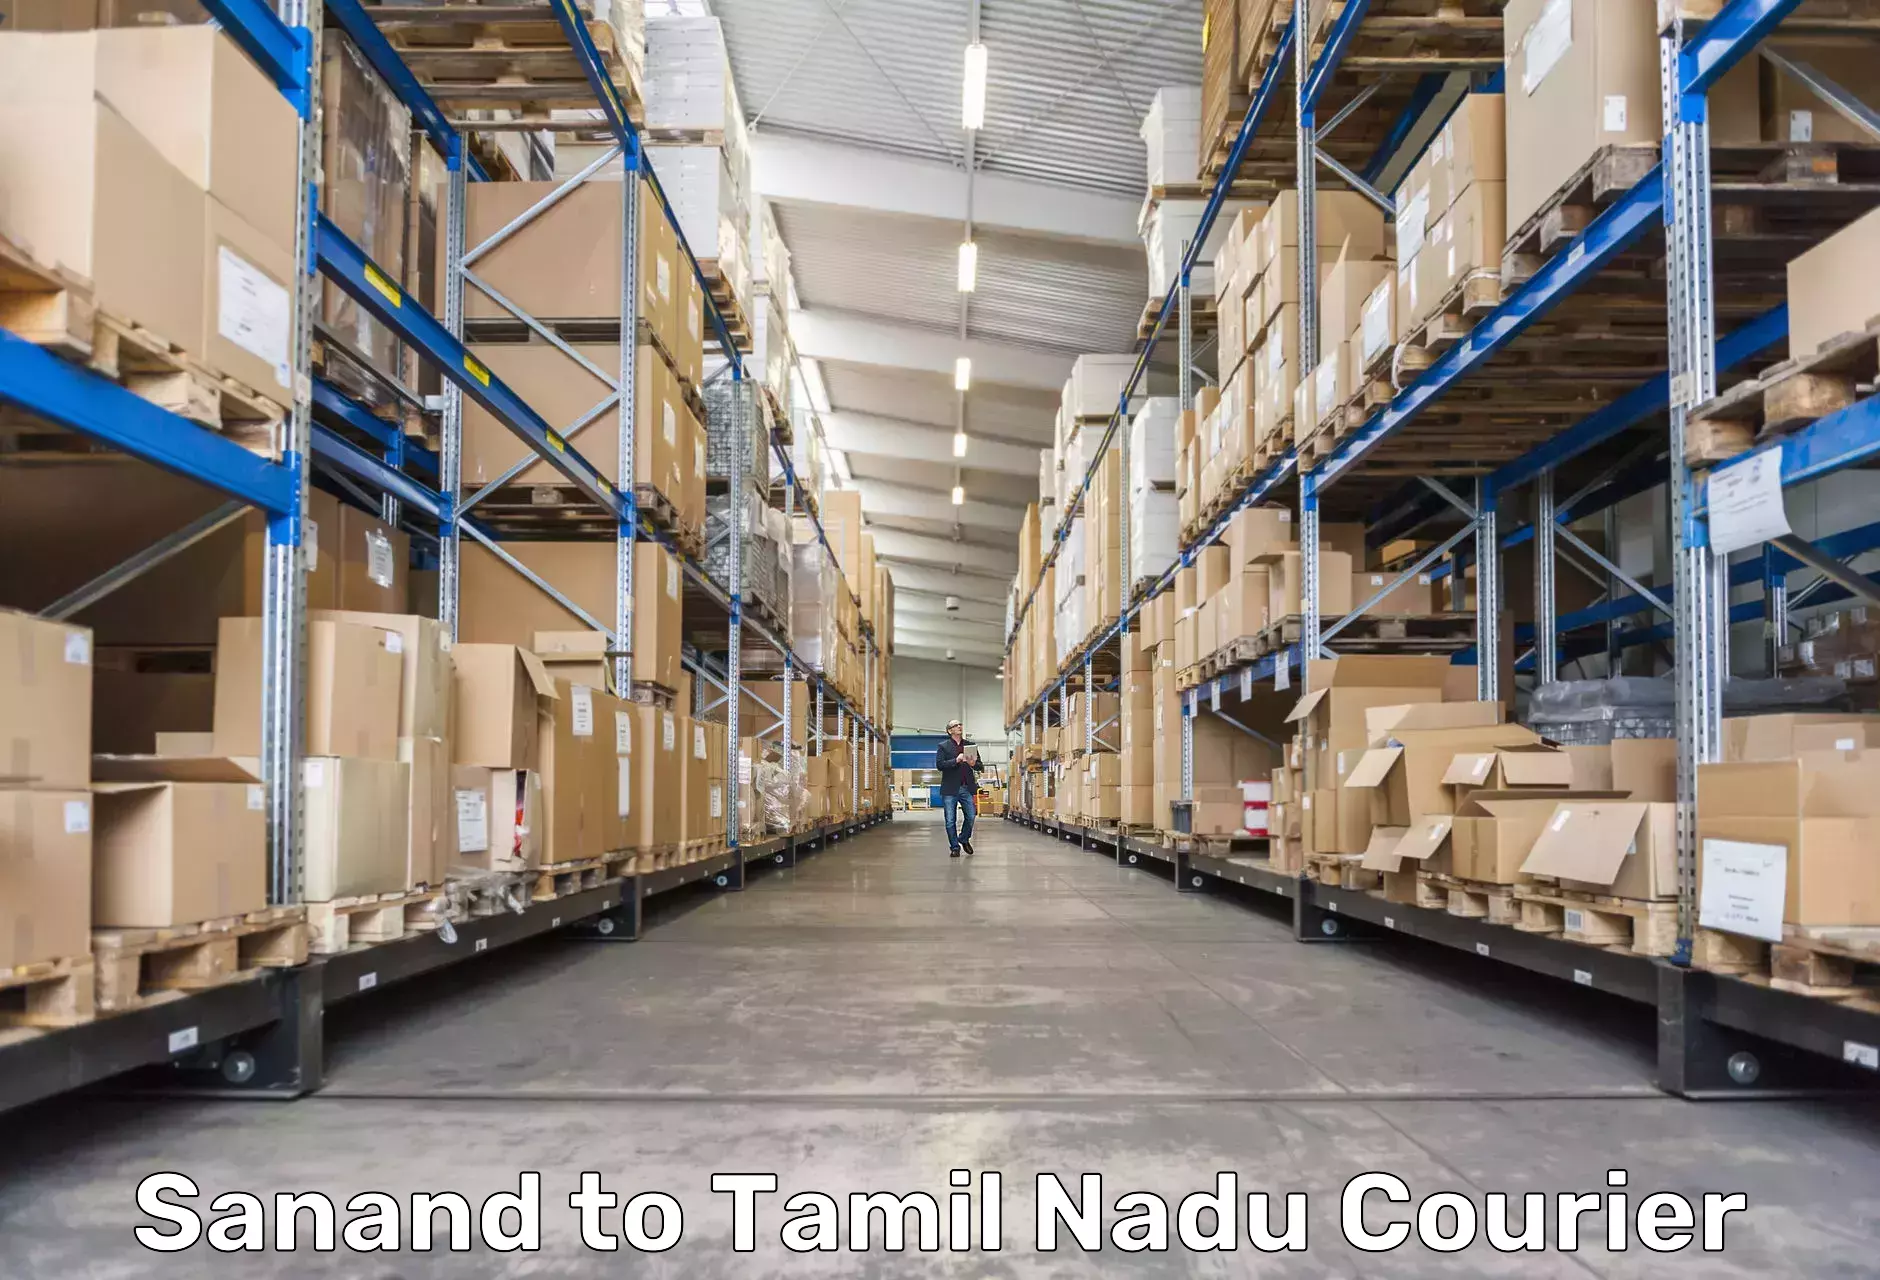 Comprehensive shipping network Sanand to Tamil Nadu